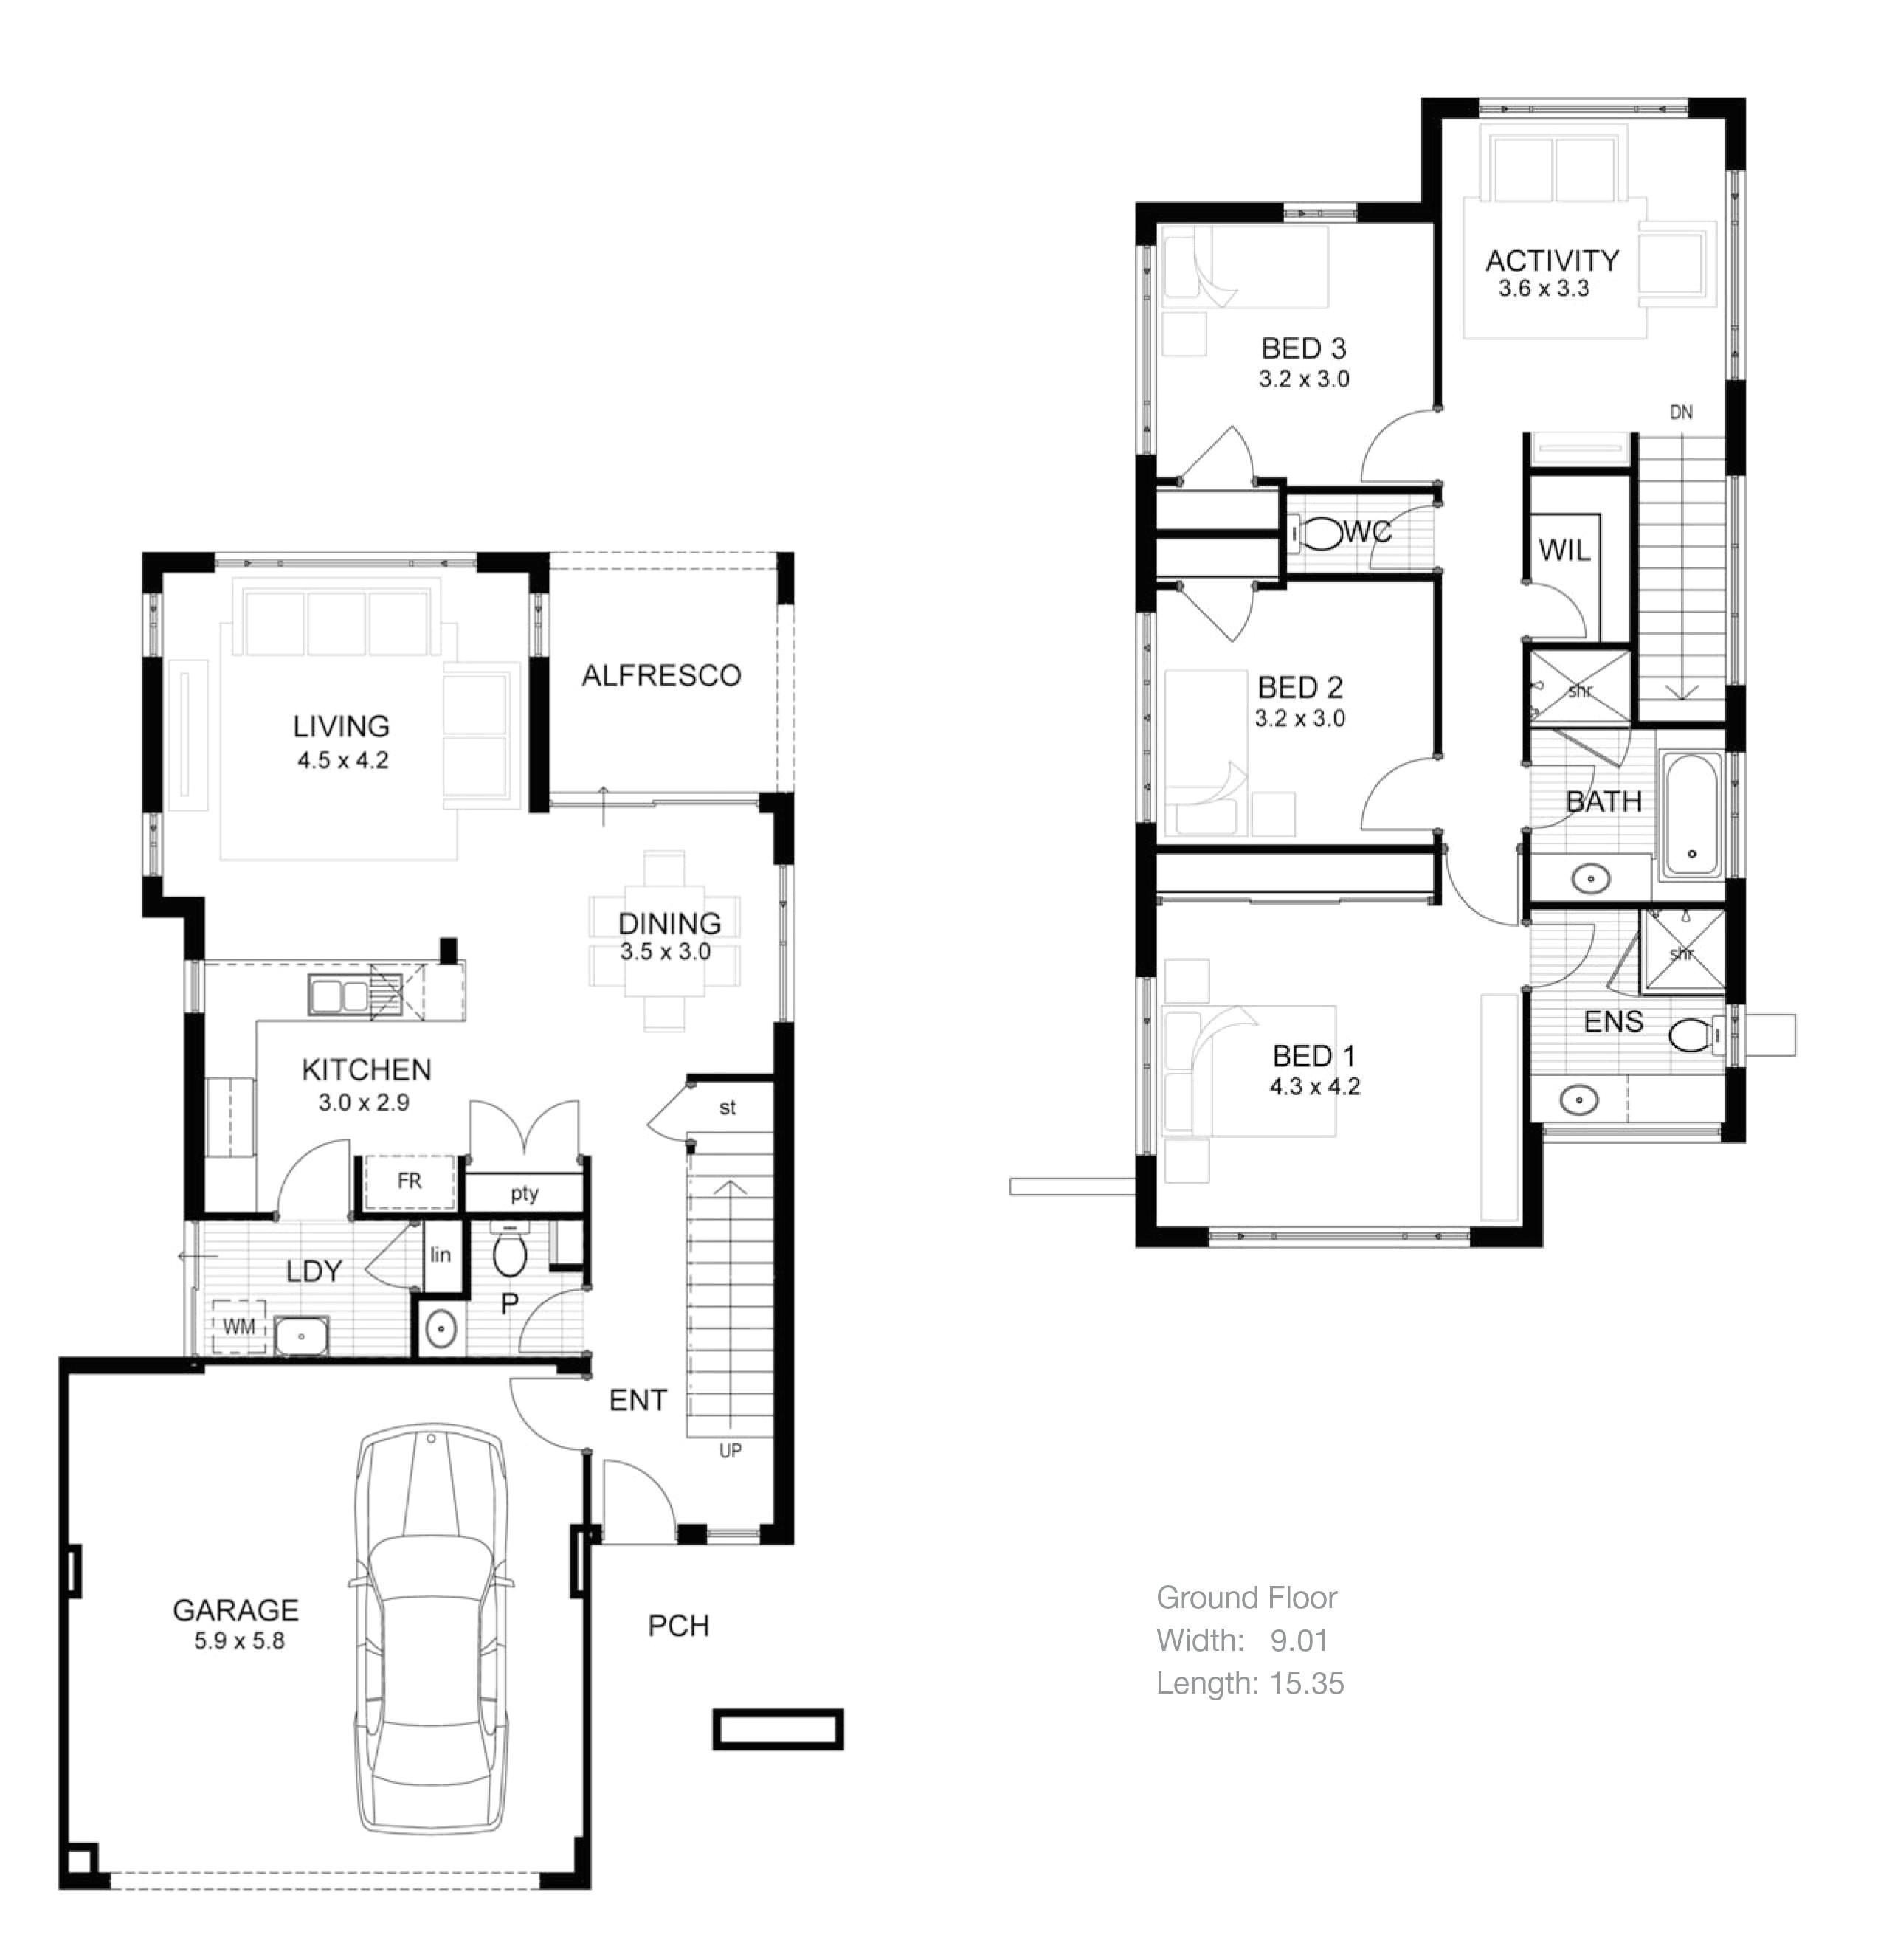 Drawing 1 Projects 39 New Draw House Floor Plan Photo Floor Plan Design